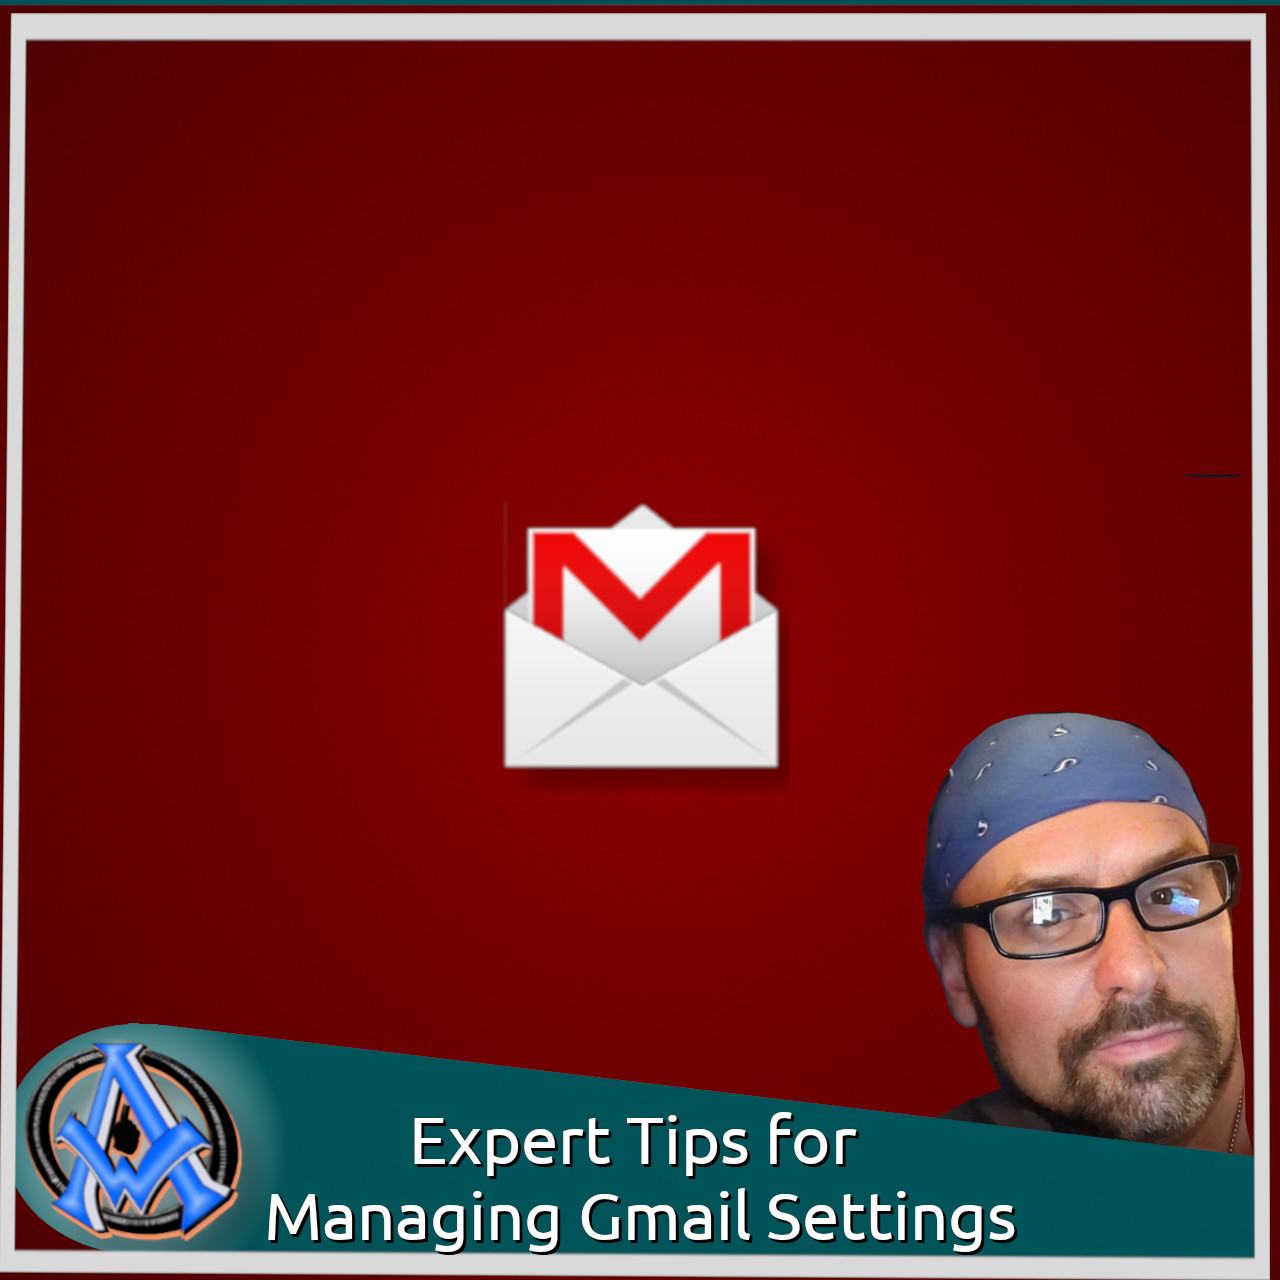 Take Control: Expert Tips for Managing Gmail Settings